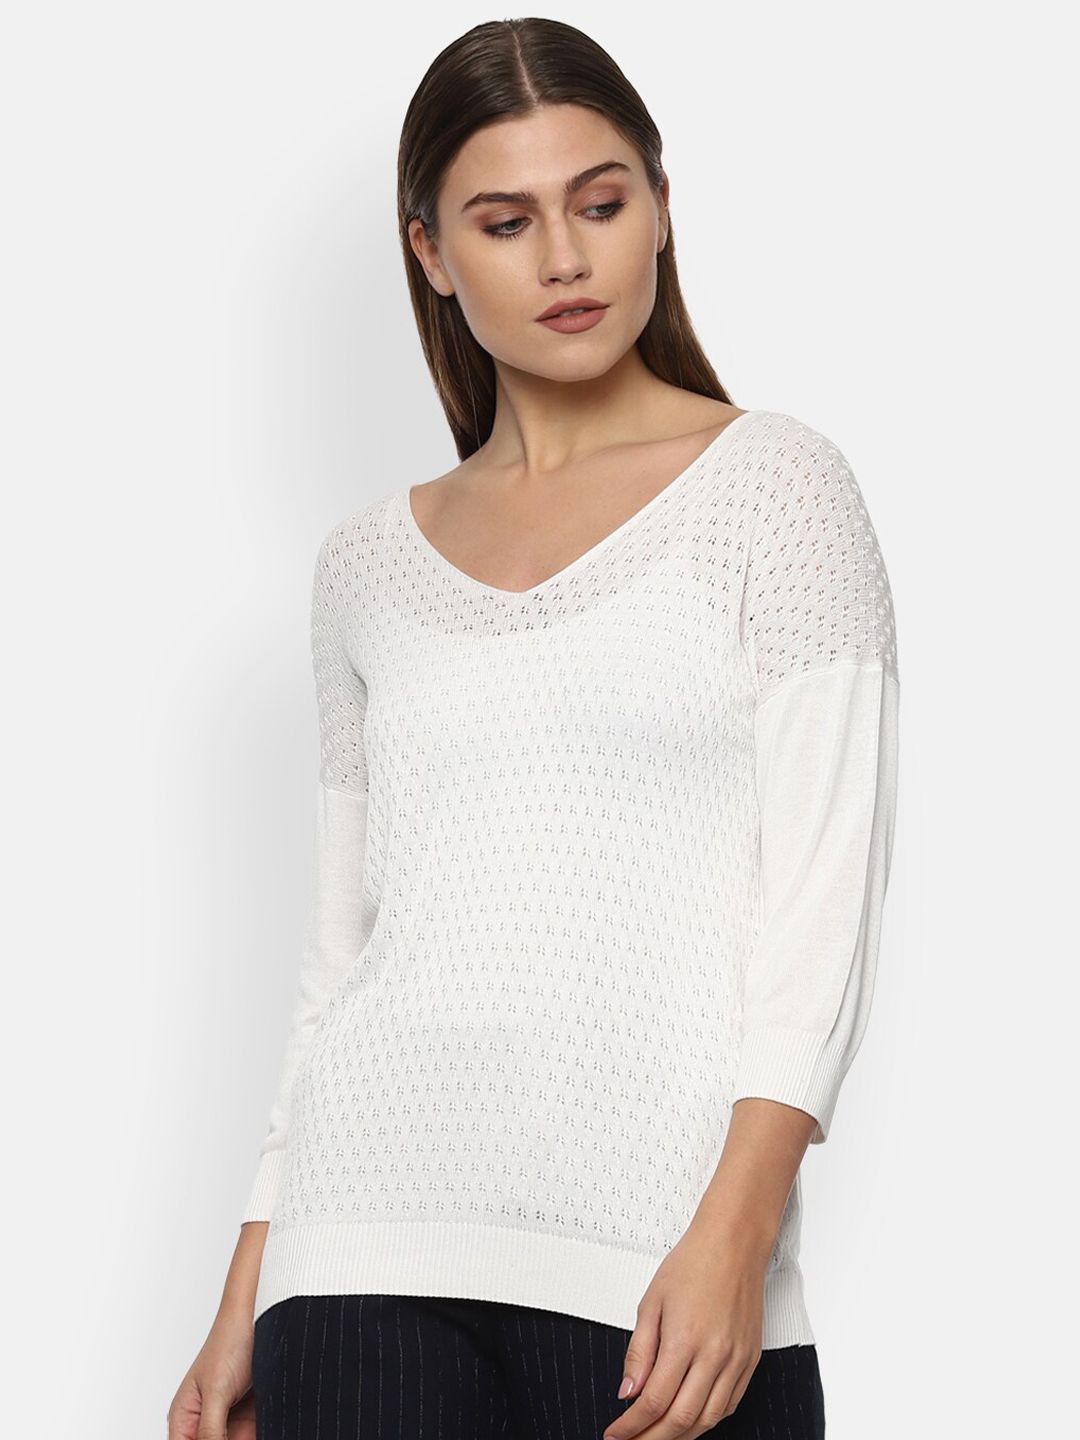 Van Heusen Woman White Cable Knit Pullover Price in India